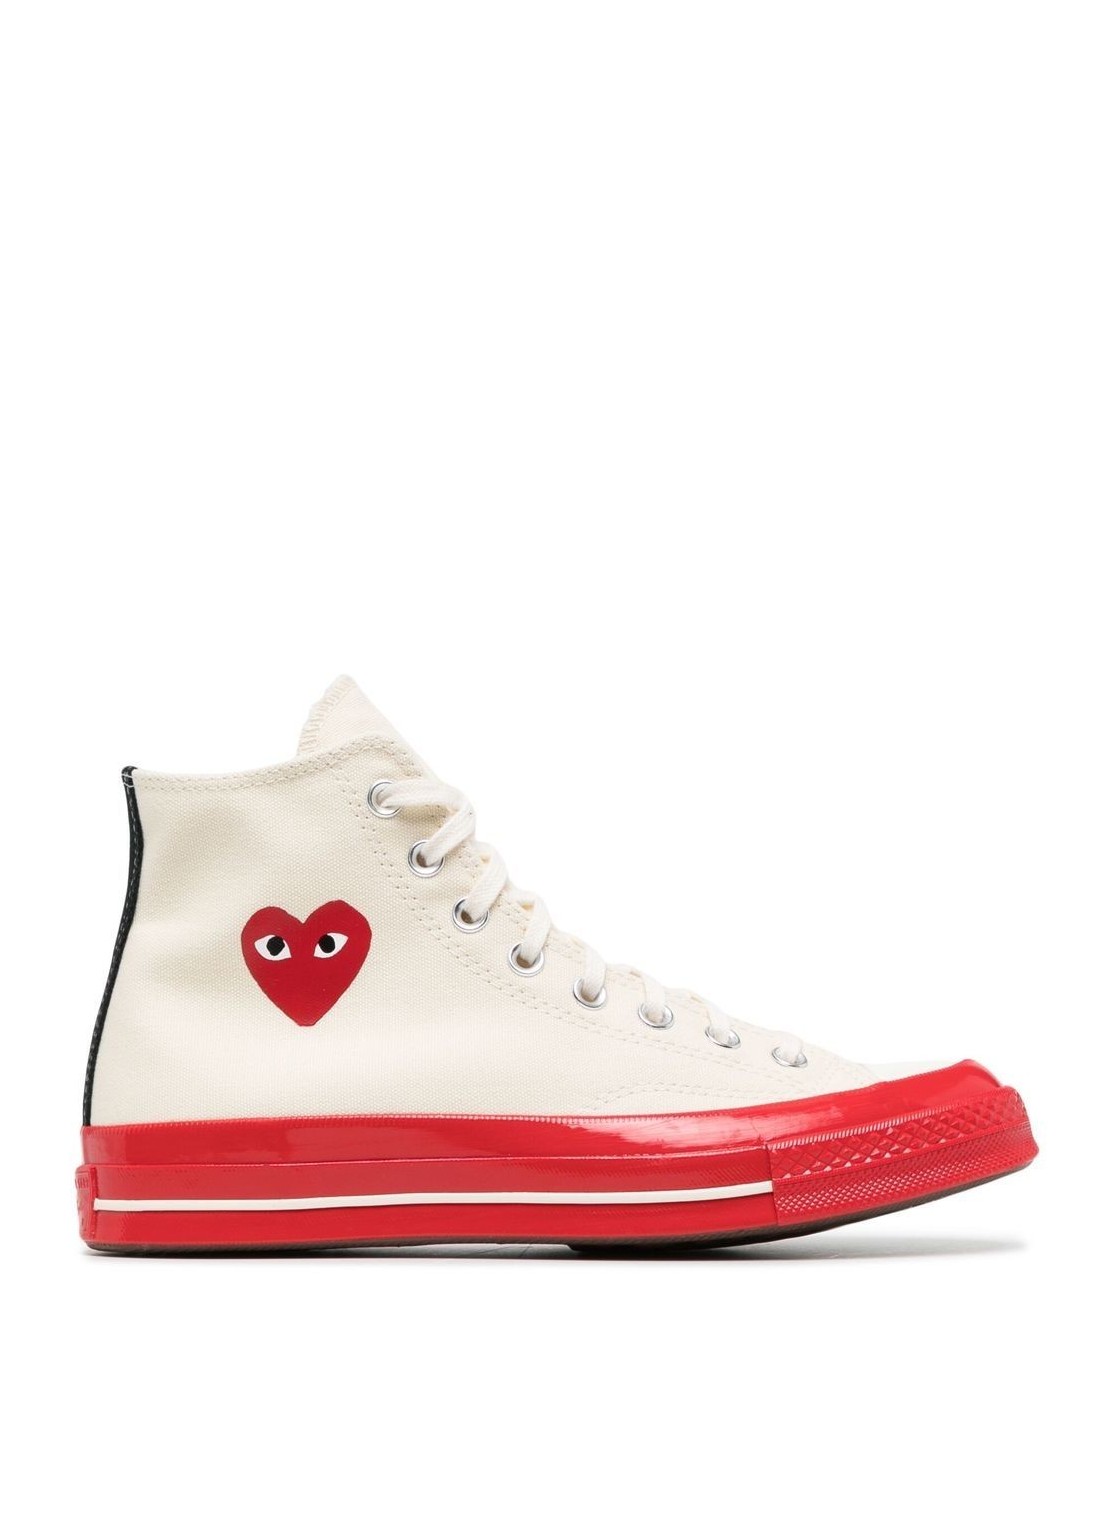 comme des garcons converse red sole high - p1k124 white Talla 35